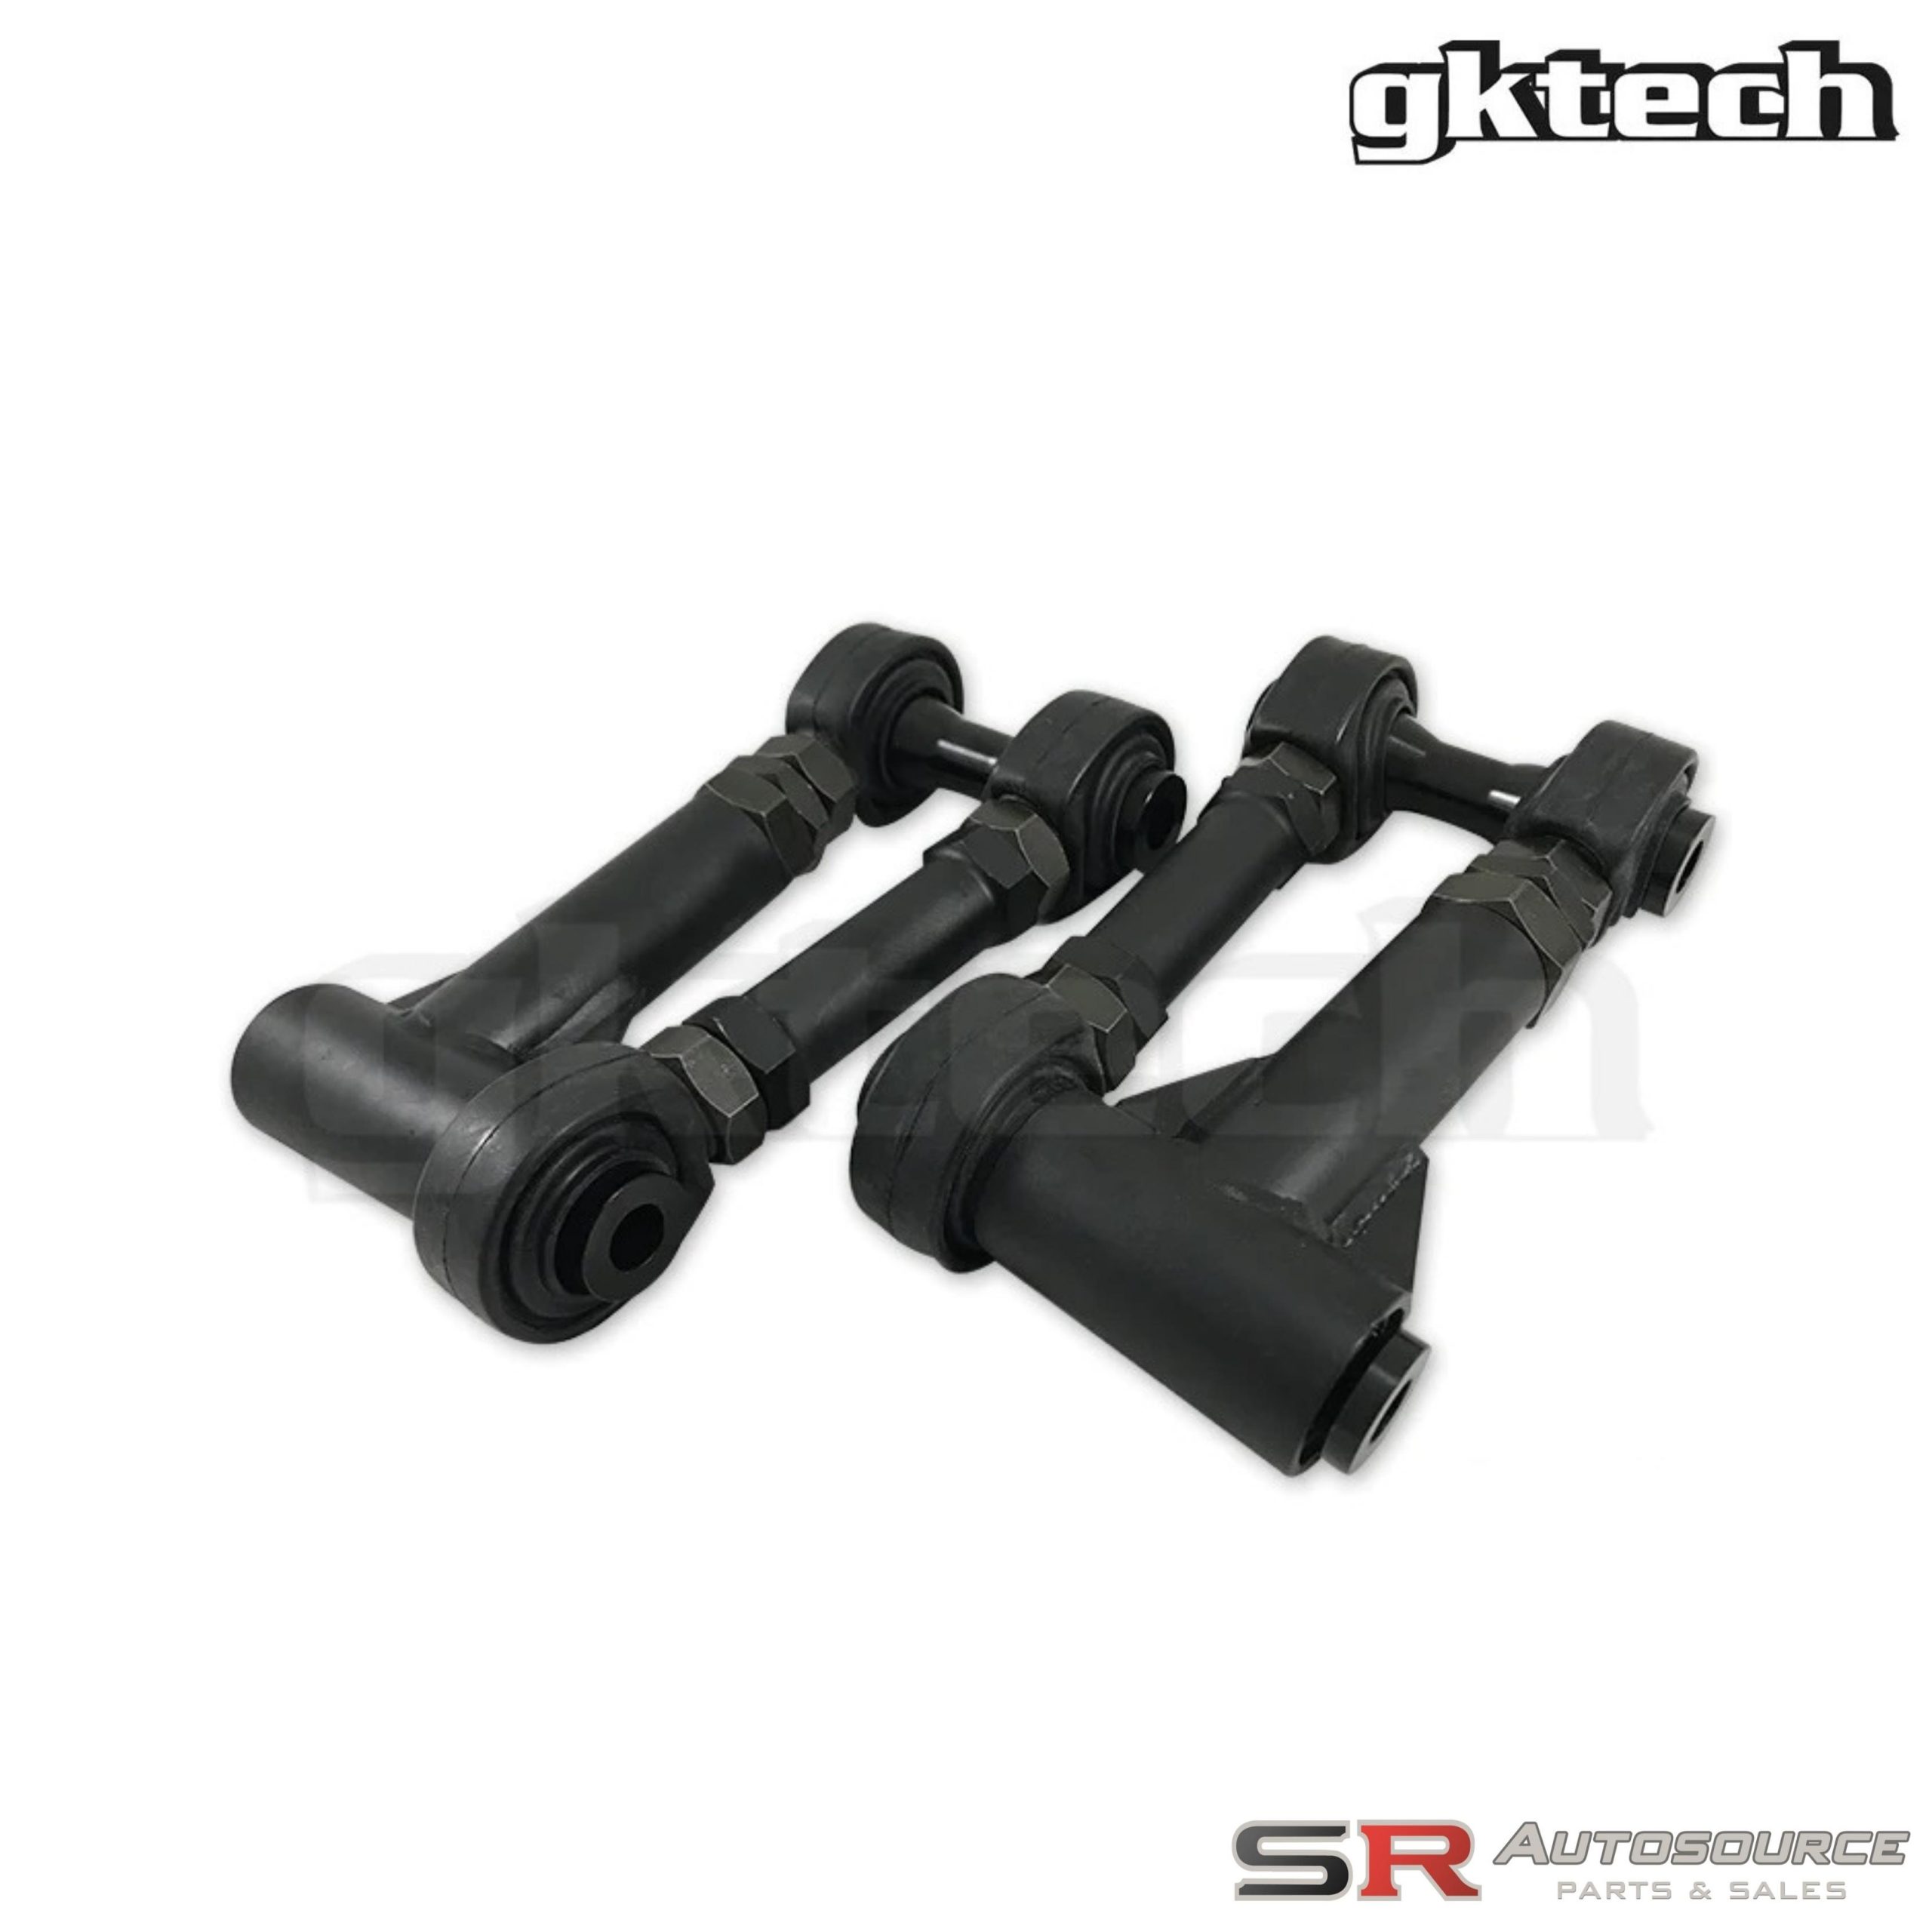 GK Tech R32 Front Upper Control Arms